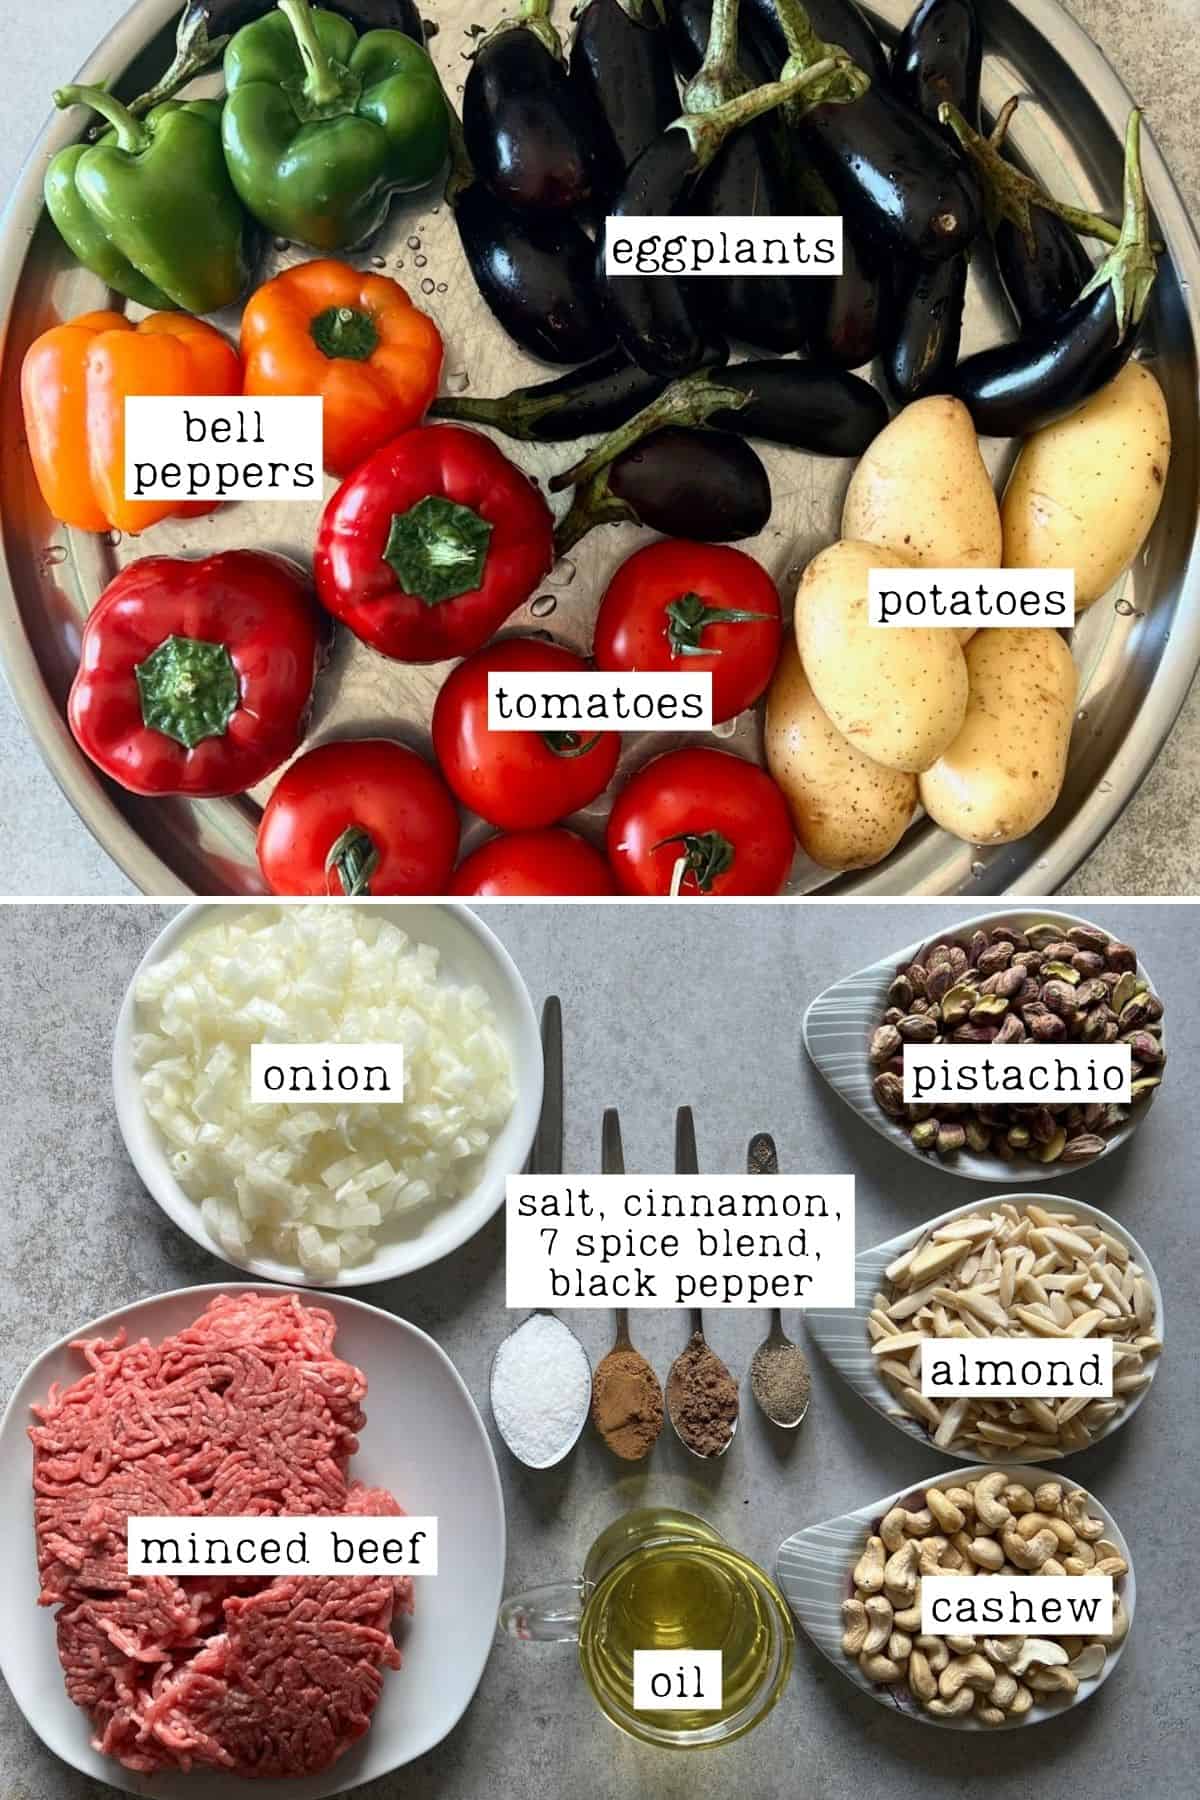 Ingredients for stuffed veggies with meat